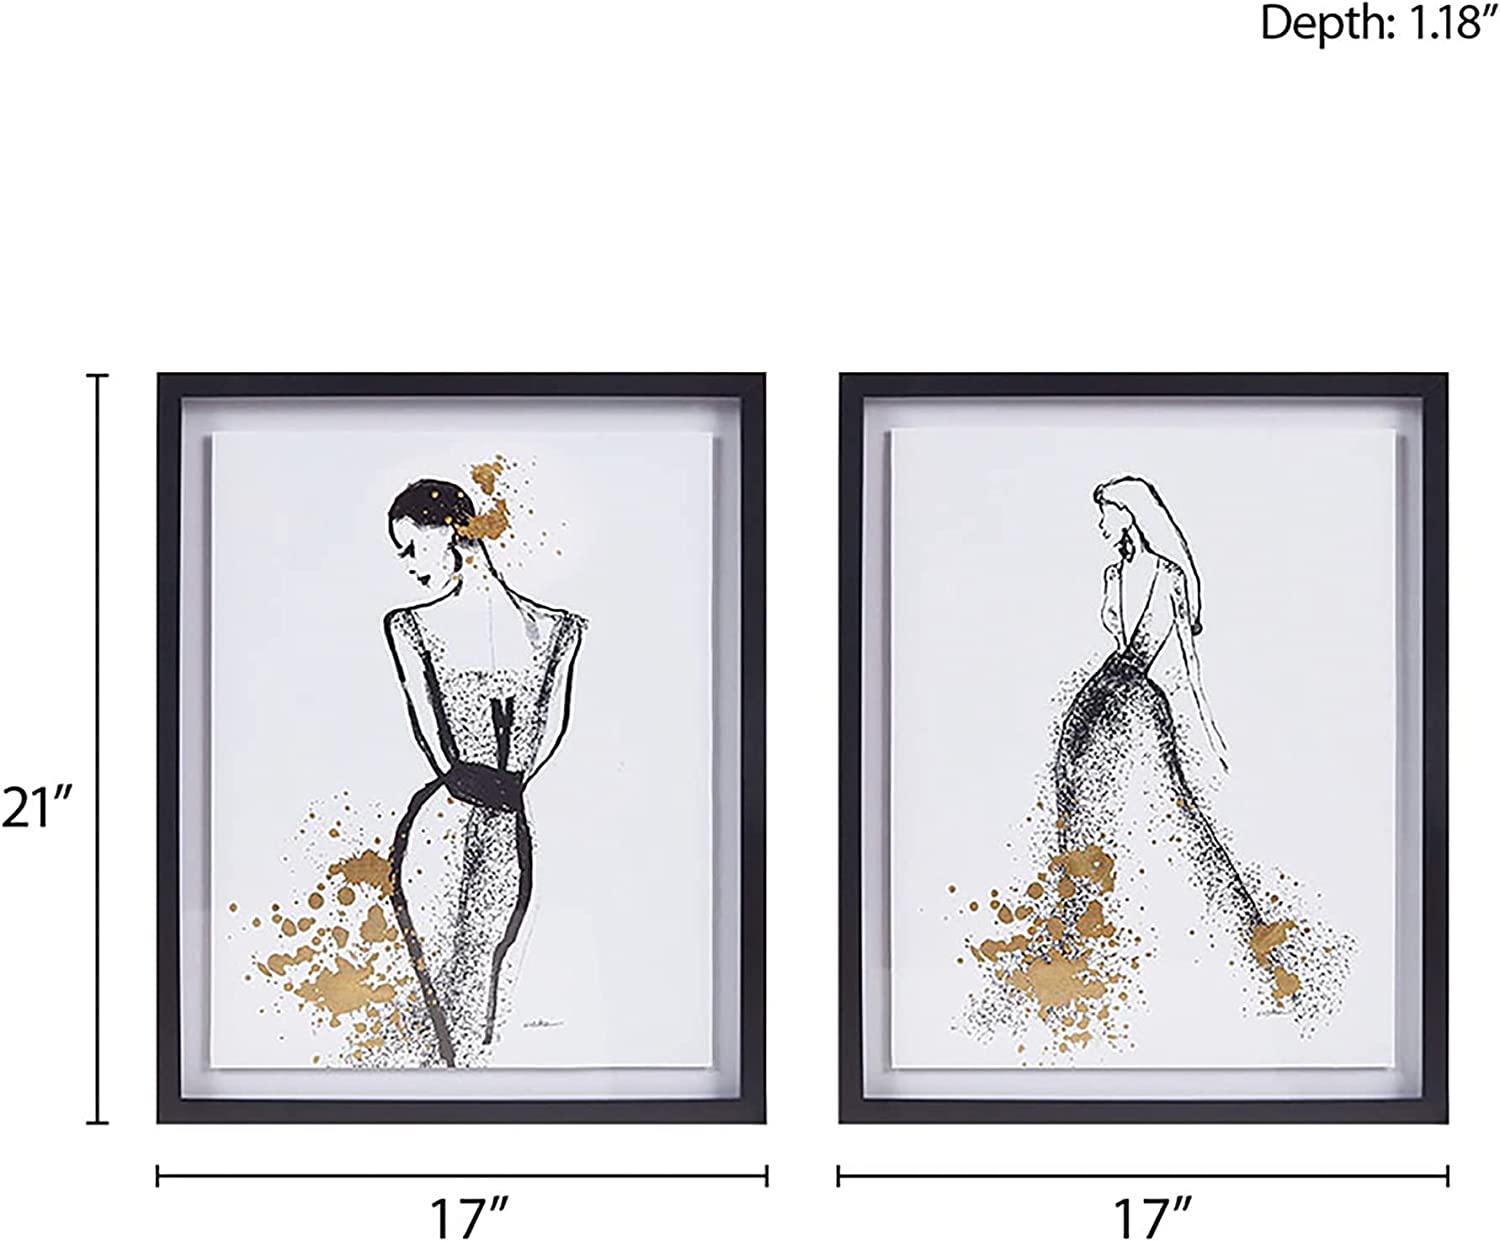 Madison Park Wall Art Living Room Décor - Posh Postures Feminine Figure Sketch, Gold Foil Accent Home Accent Dining Decoration, Ready to Hang Frame for Bedroom, 17" W x 21" H, Black/White 2 Piece